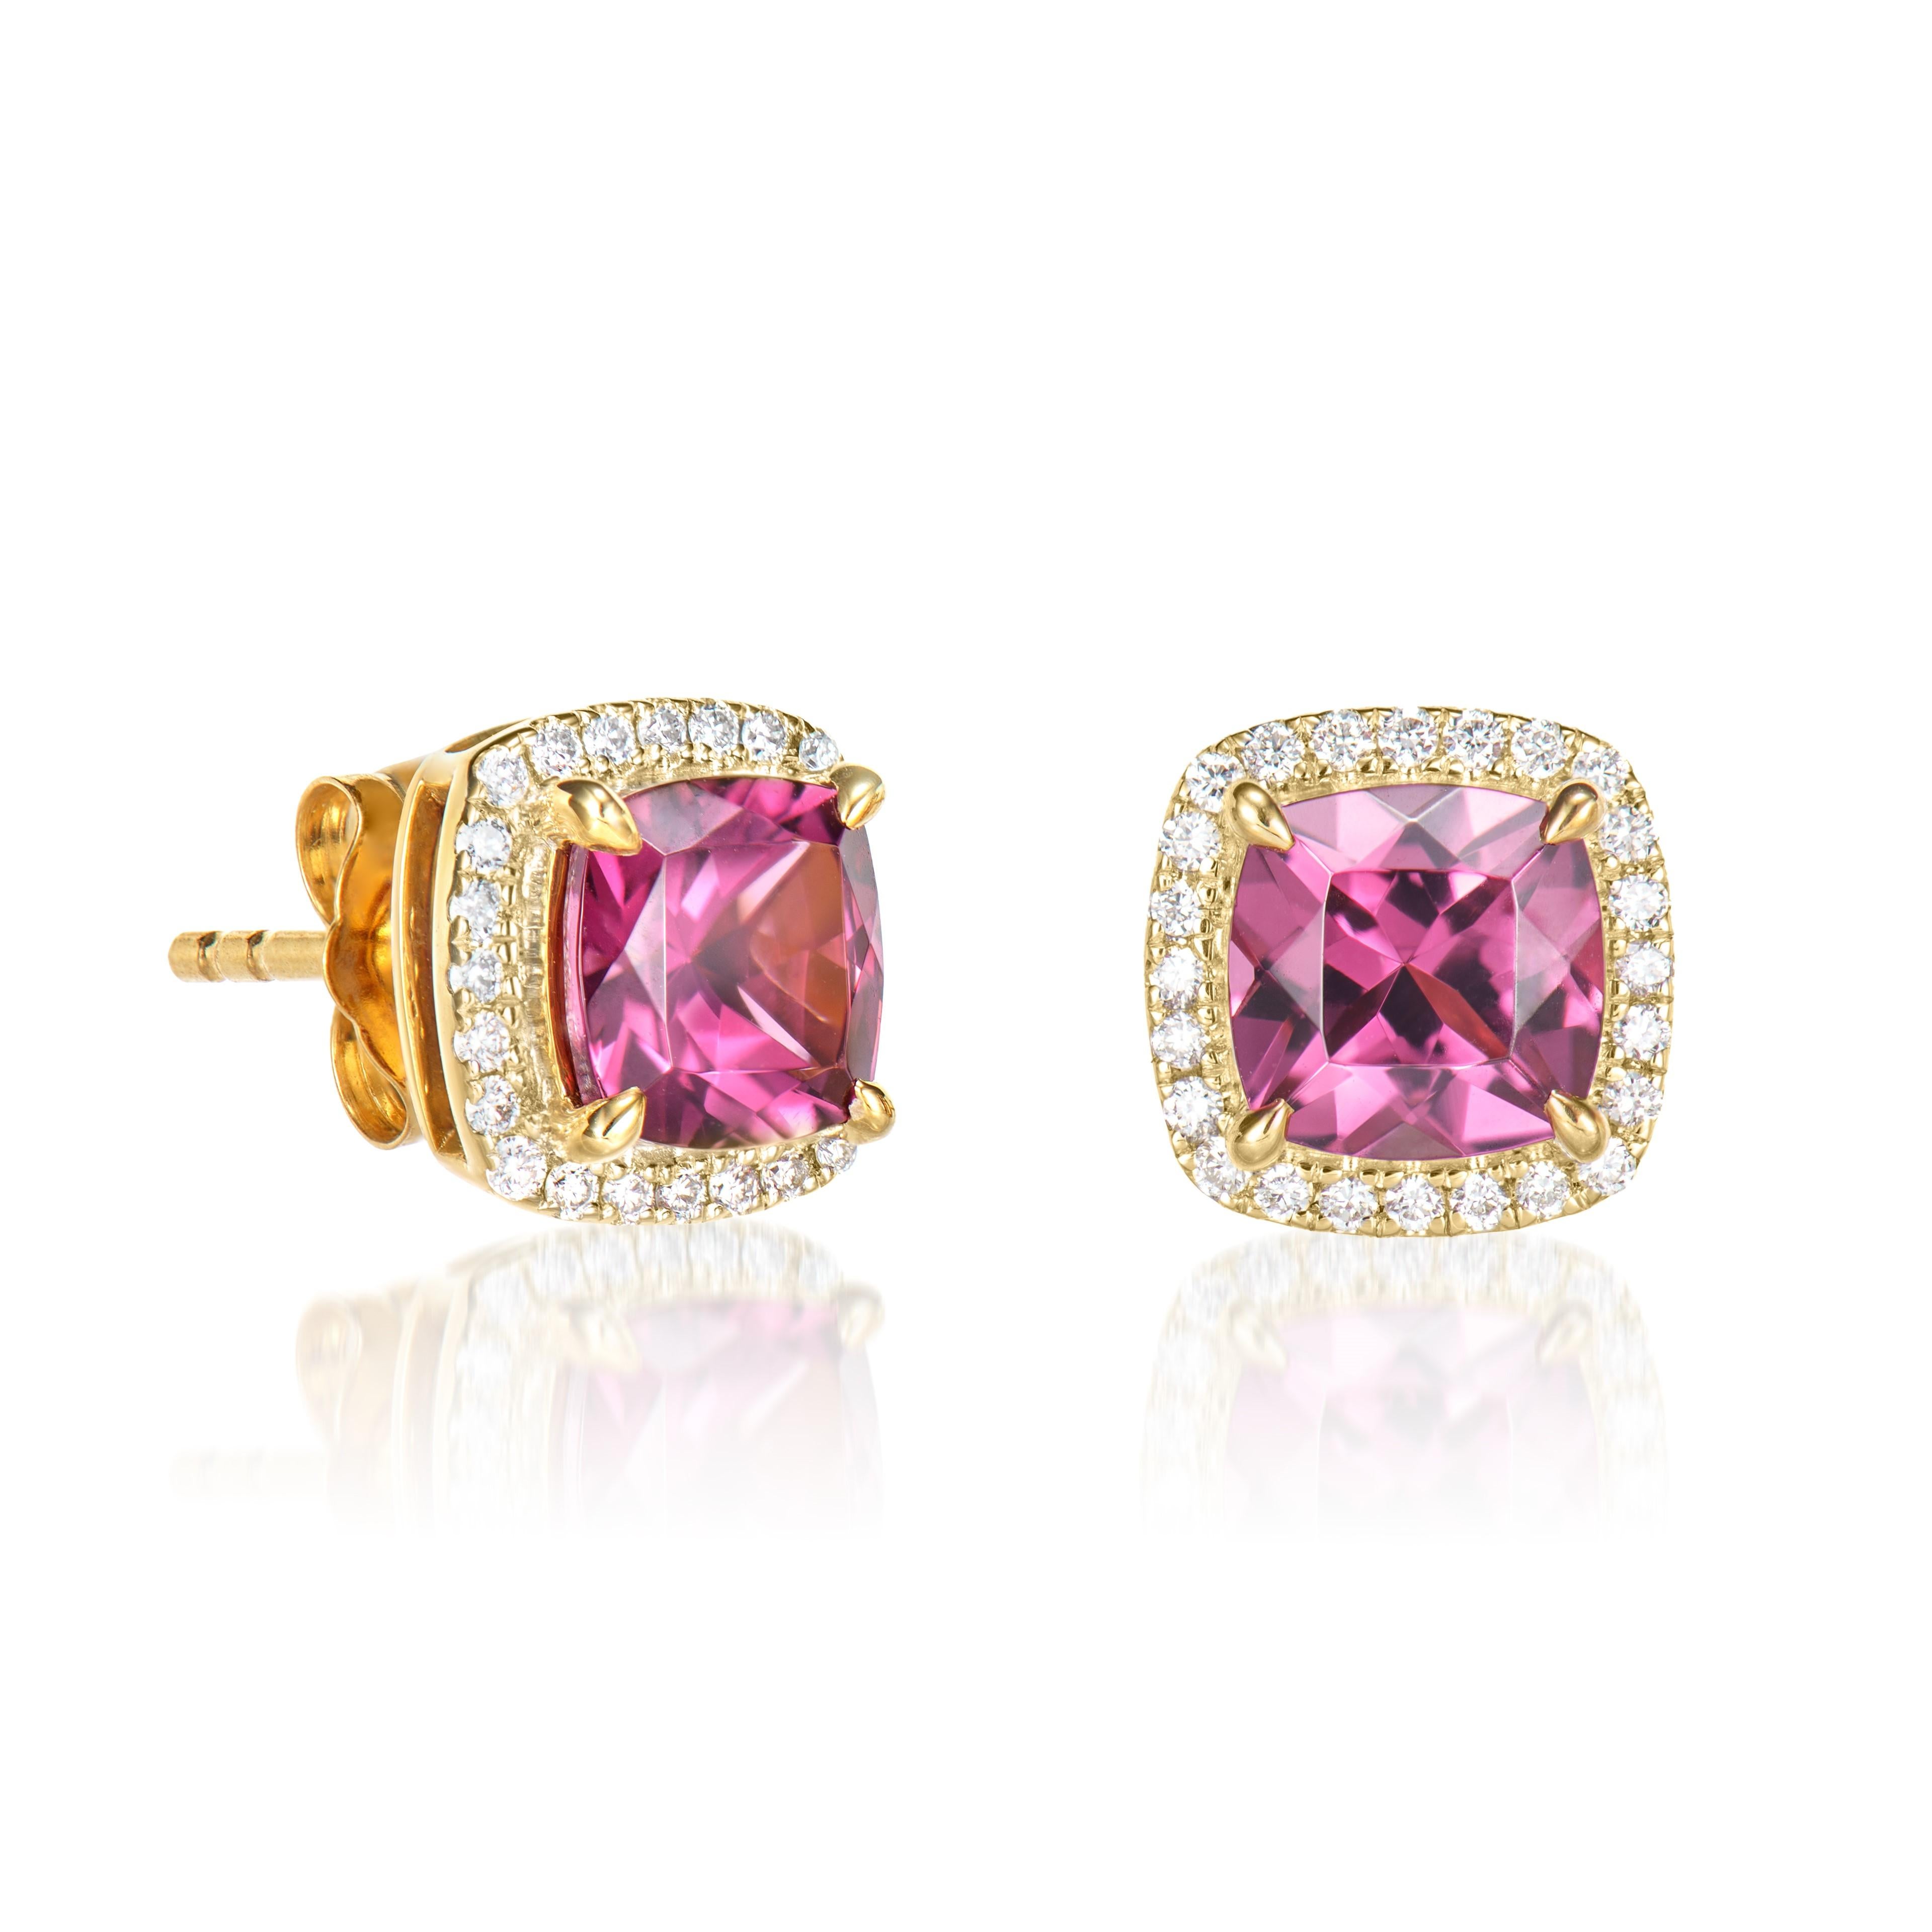 Presented A lovely collection of gems, including Amethyst, Peridot, Rhodolite, Sky Blue Topaz, Swiss Blue Topaz and Morganite is perfect for people who value quality and want to wear it to any occasion or celebration. The yellow gold Rhodolite Stud